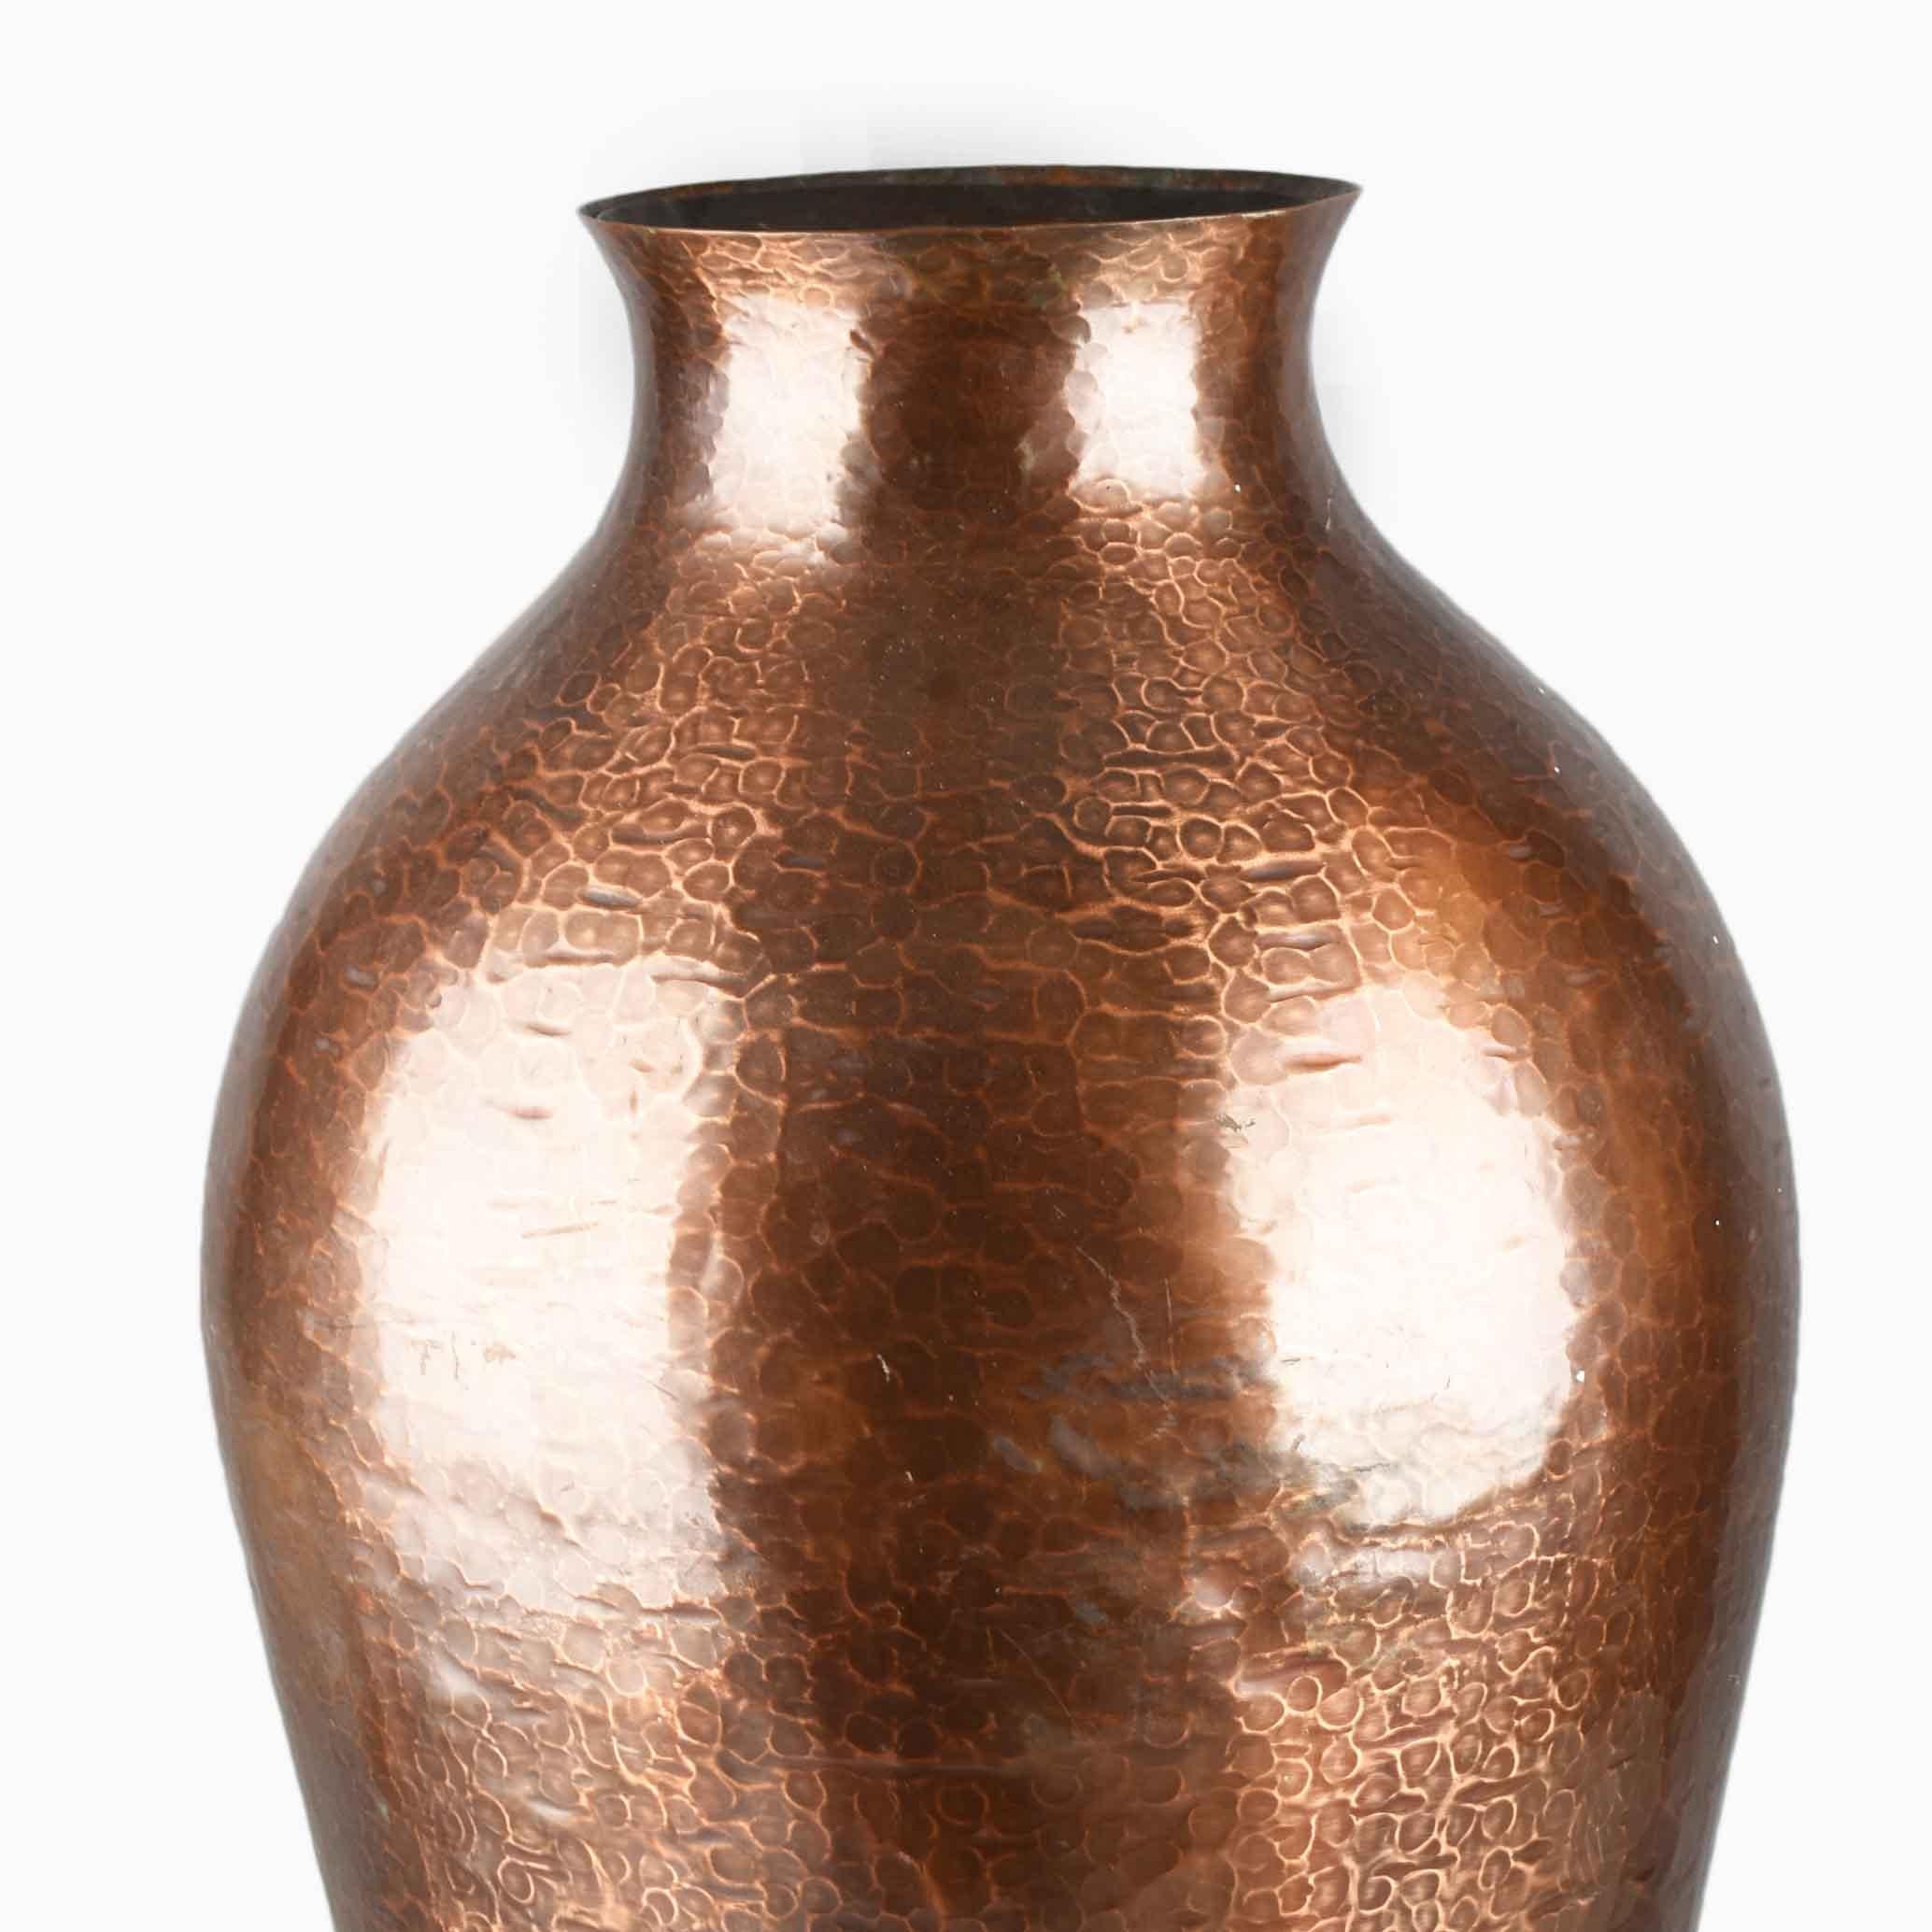 Big floor vase is an original decorative object realized in the mid-20th century. 

Original copper made in Germany. 

Created by Harald Buchrucker.

The vase is in a very good vintage condition with normal signs of use.

Very beautiful and